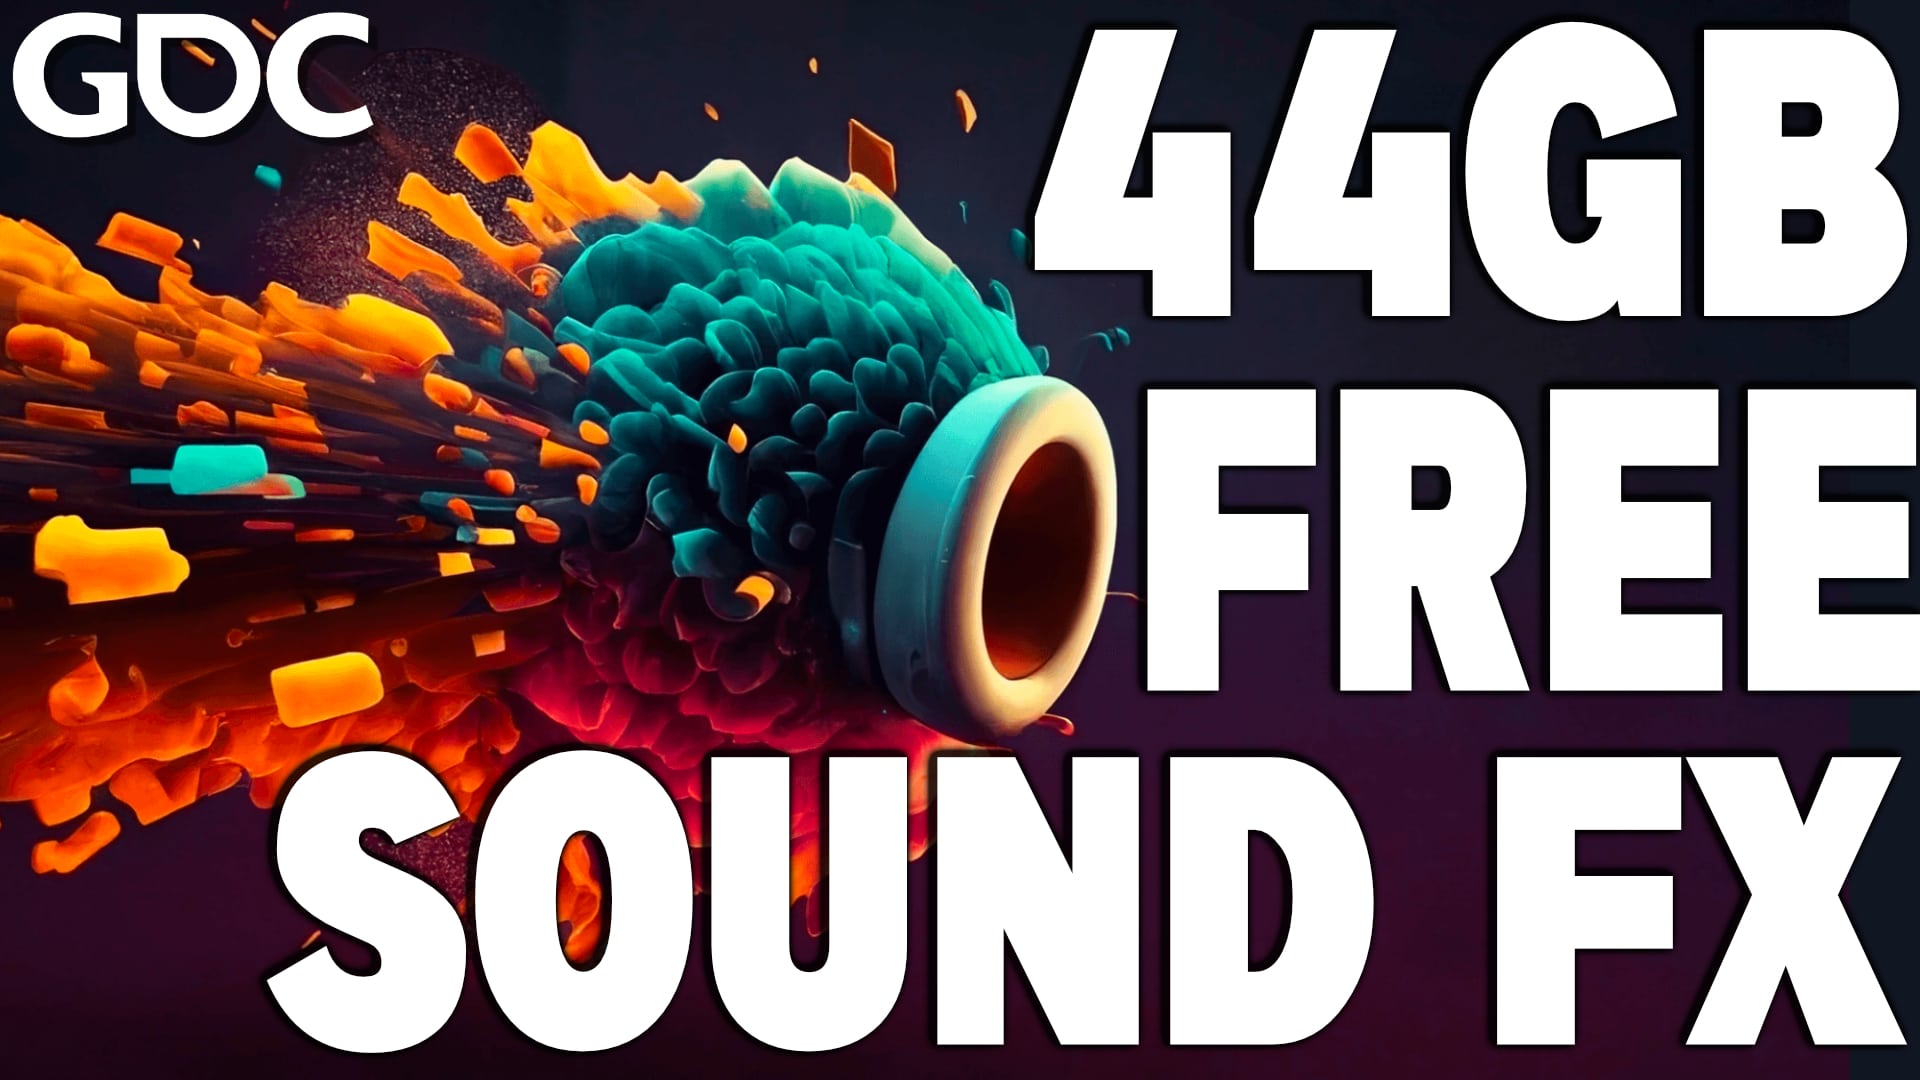 Sonniss 44GB+ Sound Effect Giveaway at GDC 2023